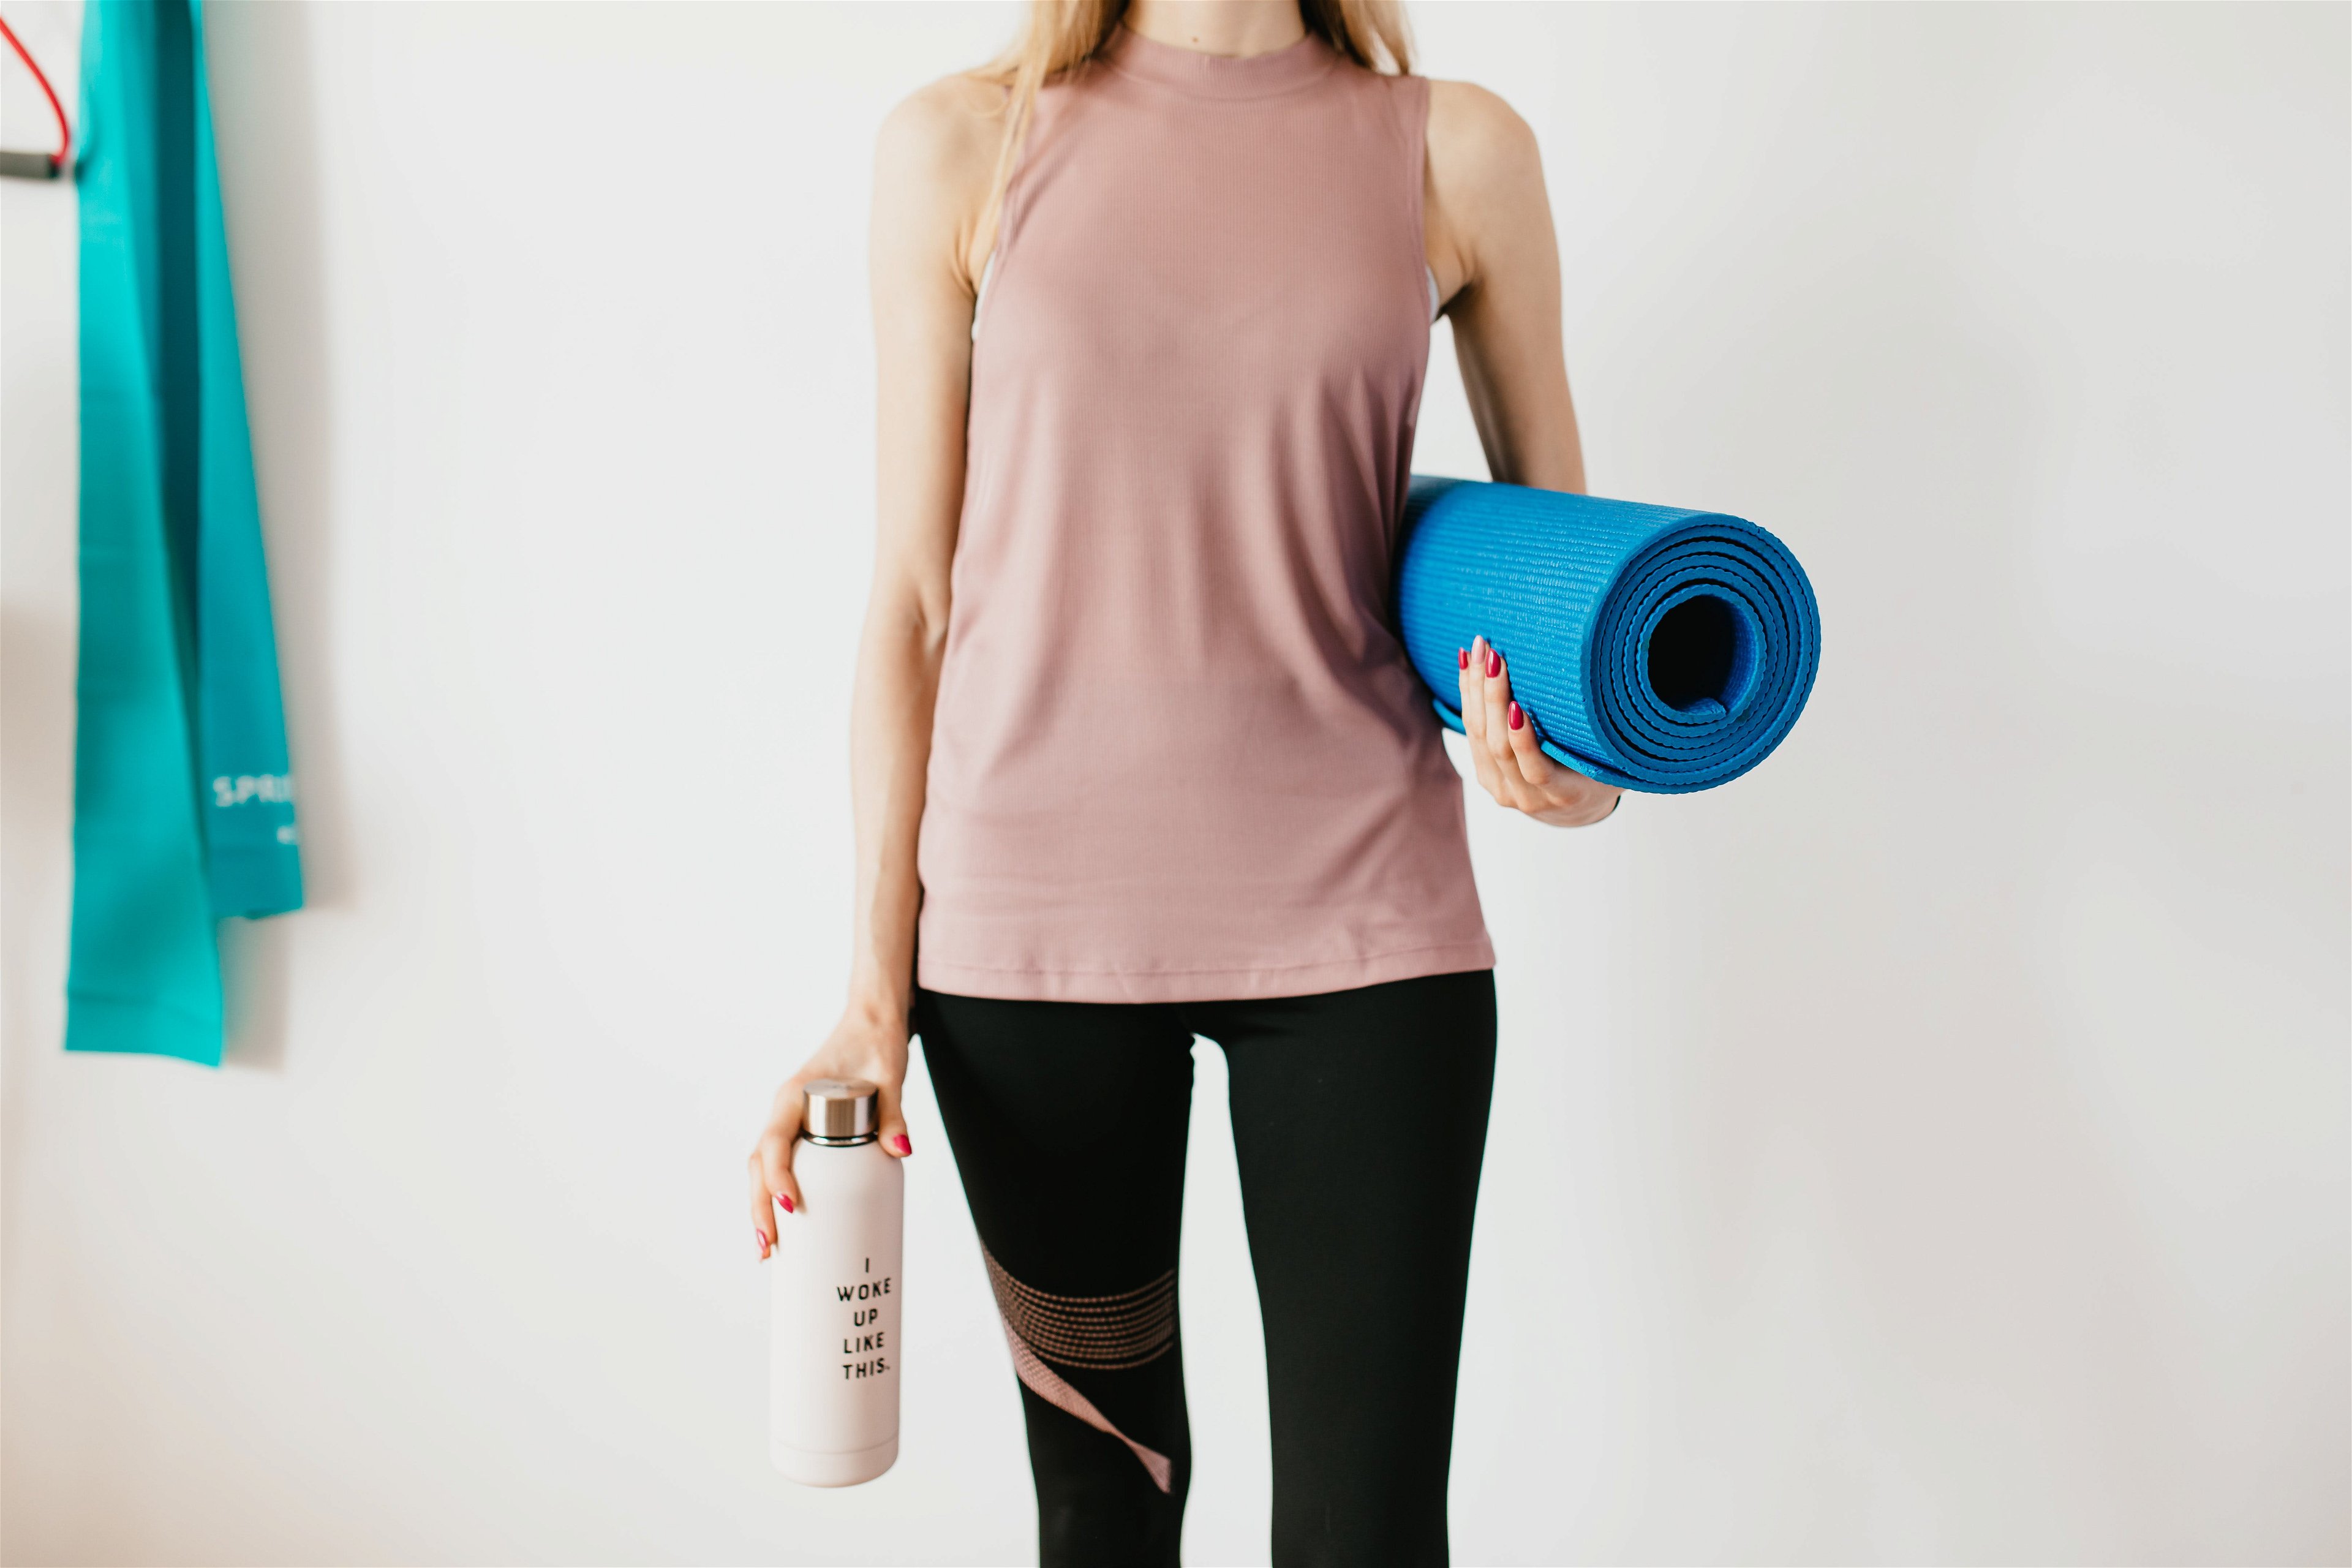 Incorporating Props into Your Pilates Classes Workshop